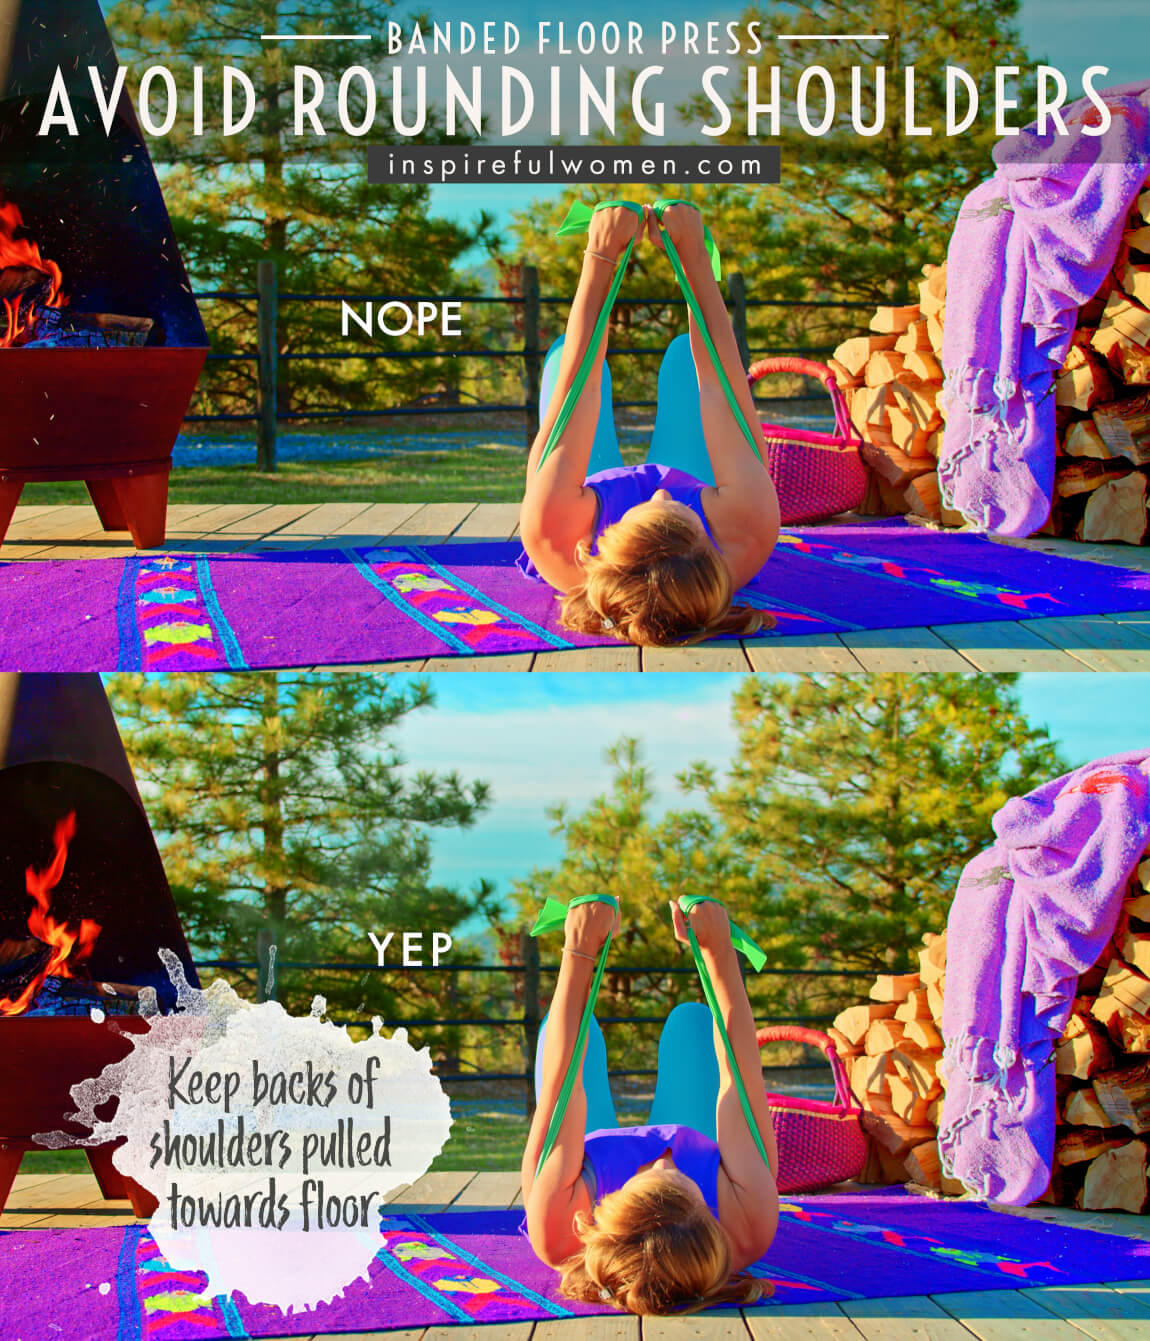 avoid-rounding-shoulders-banded-floor-chest-press-exercise-common-mistakes